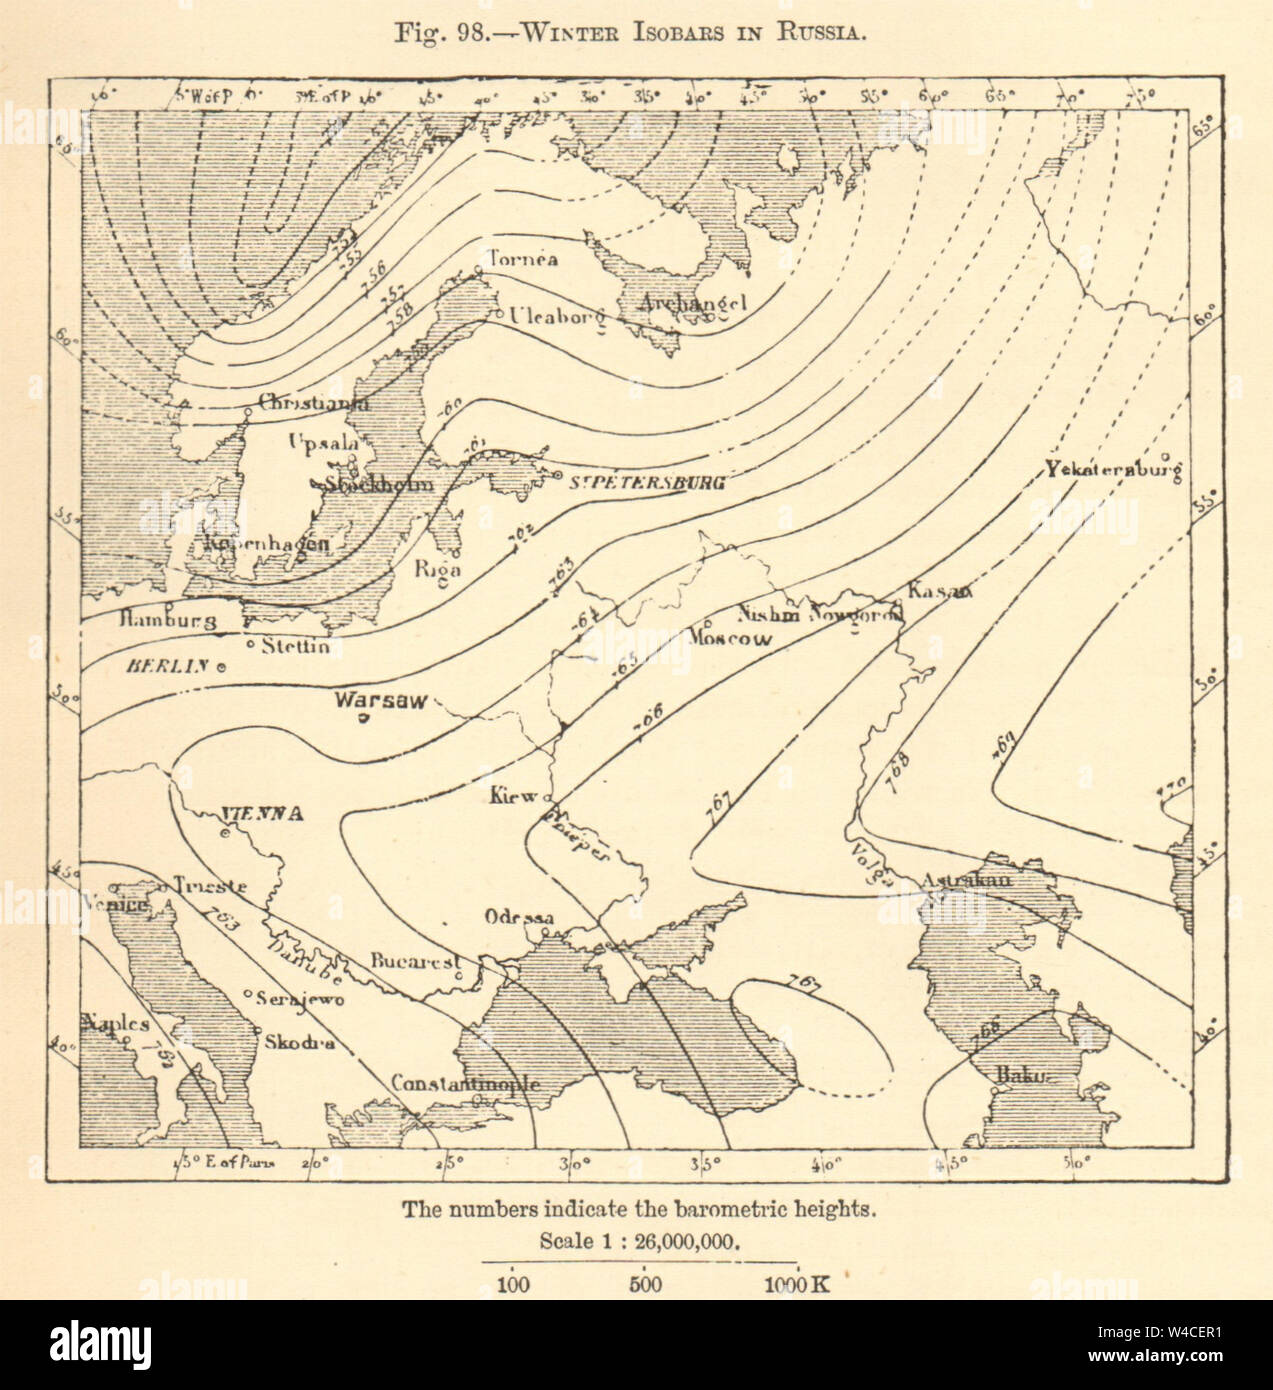 Winter Isobars in Russia. Sketch map 1886 old antique vintage plan chart Stock Photo